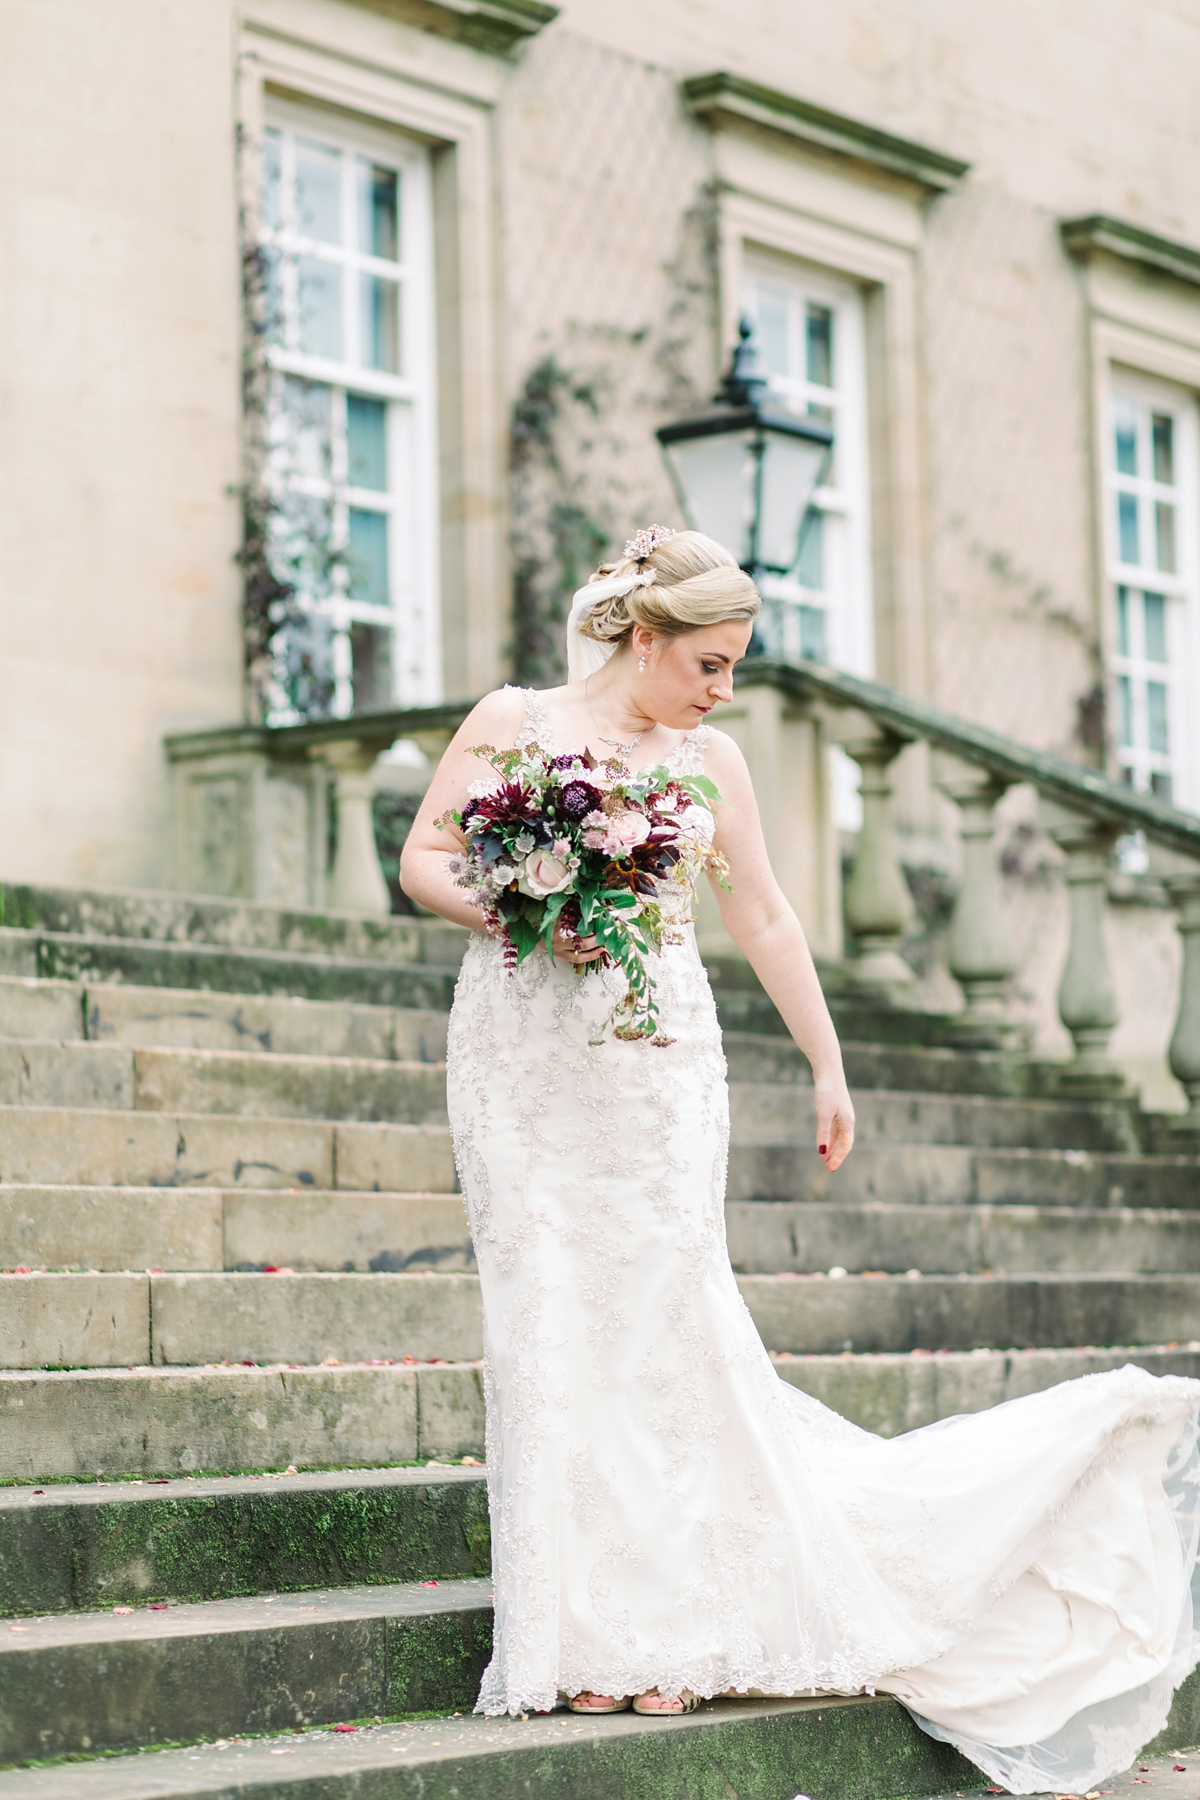 24 A Maggie Sottero gown for a Scottish country house wedding